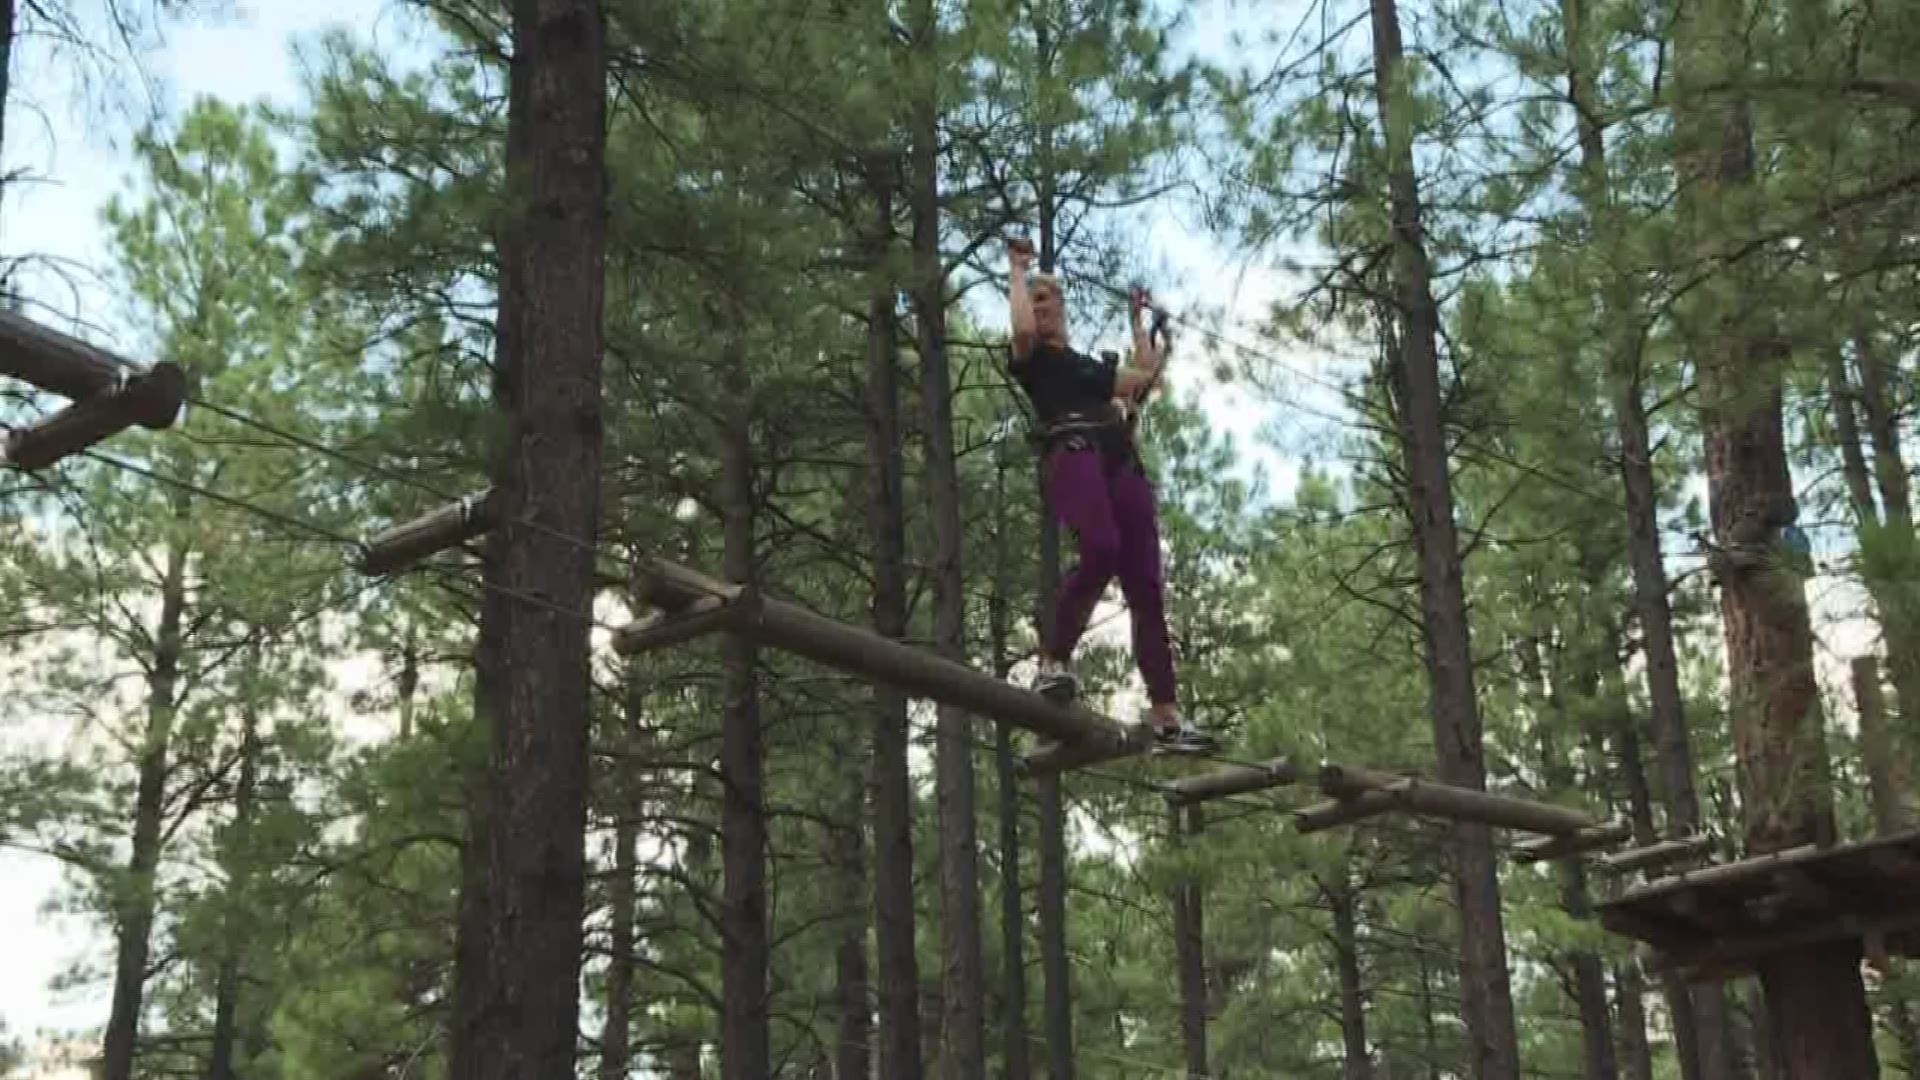 Enjoy the obstacle course and zipline down 377 feet of cable at the Flagstaff Extreme Adventure Course